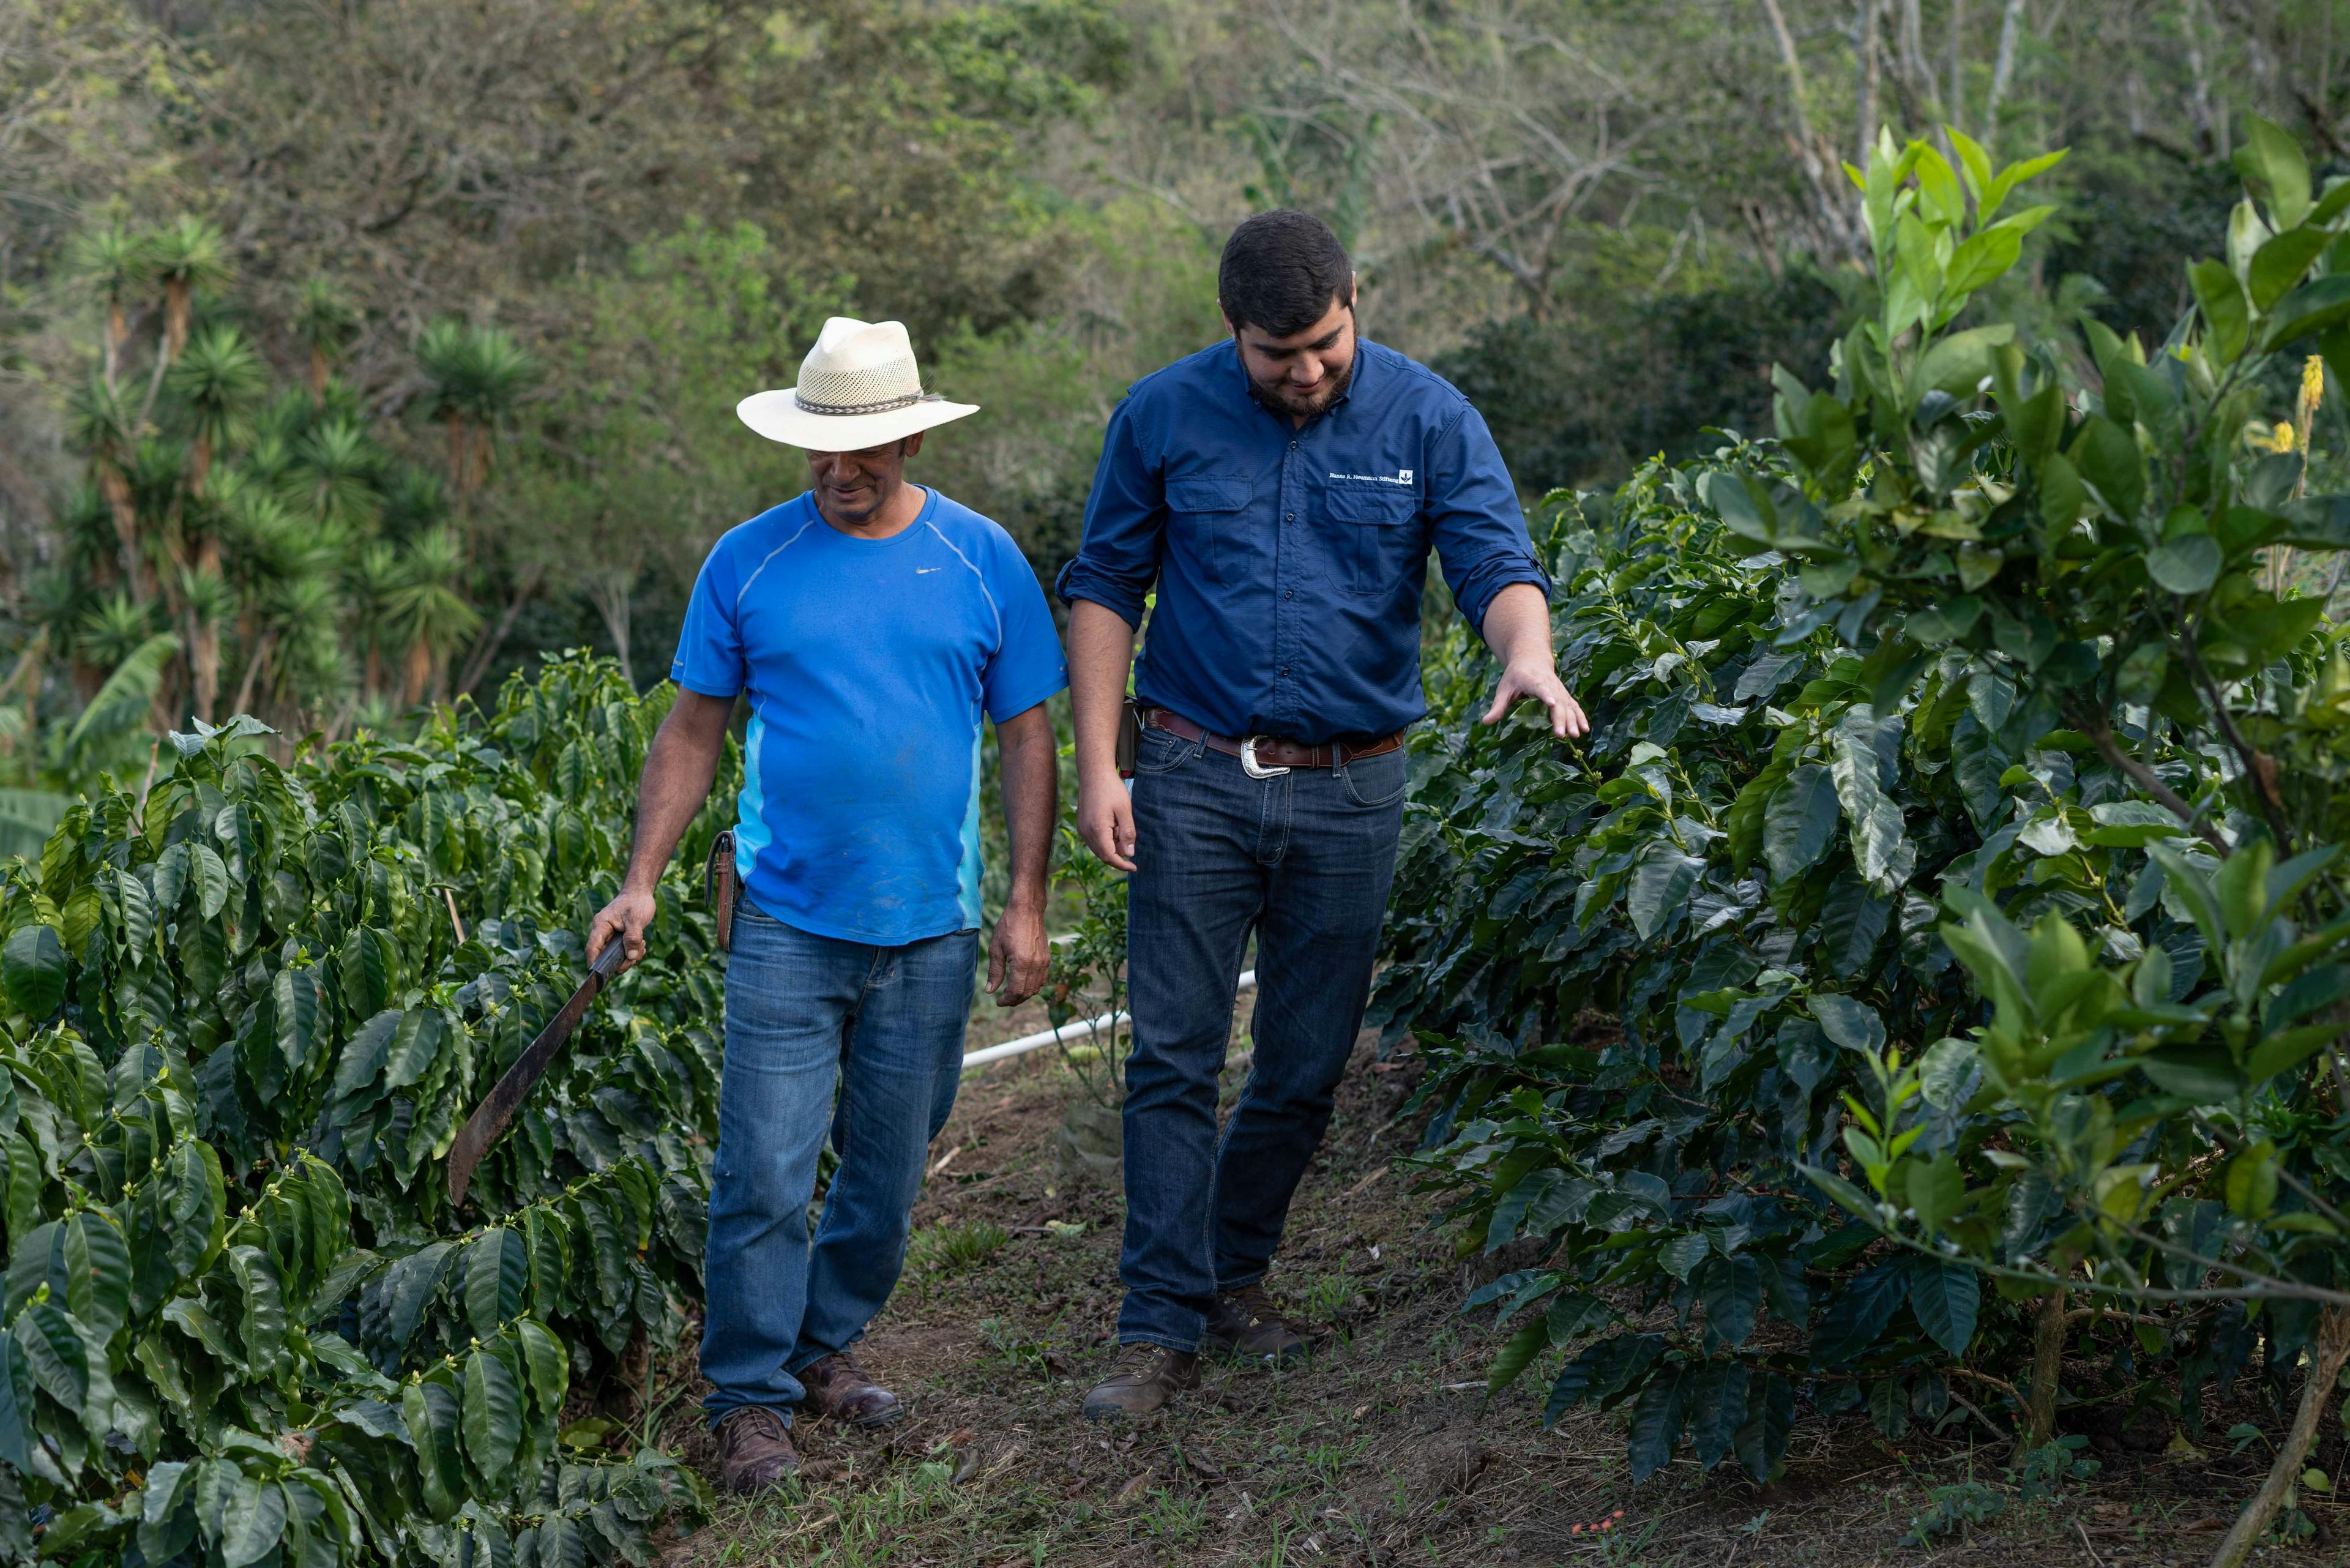 Smallholder families in coffee regions are confronted by climate change